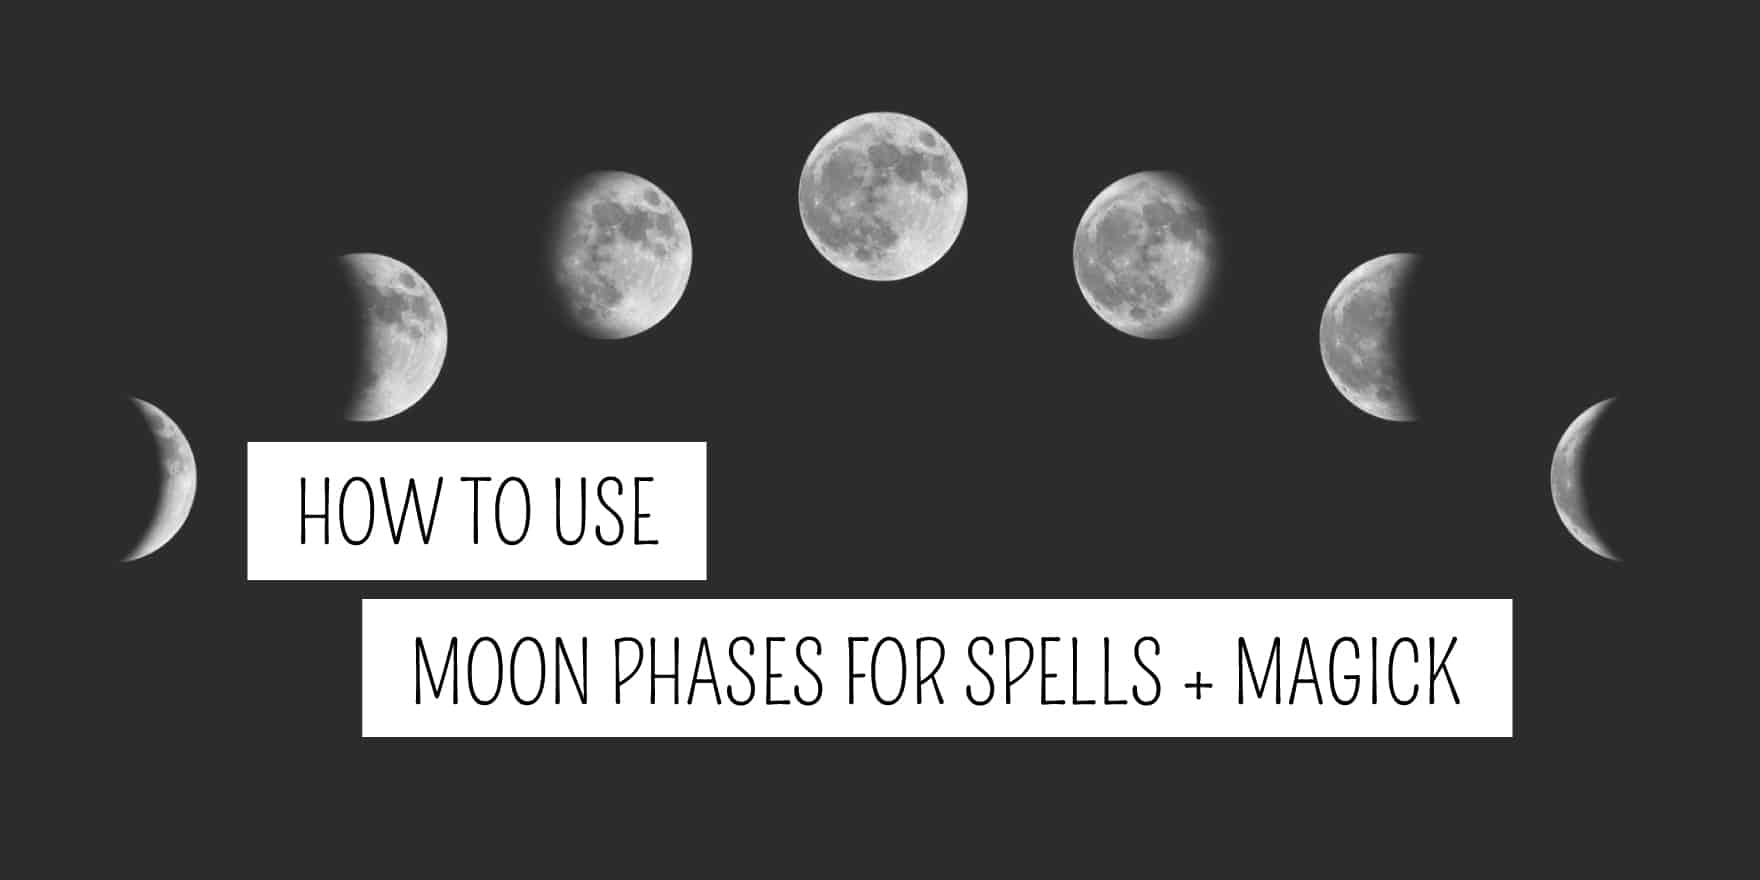 A guide to lunar timing: harnessing the moon's phases for spells and metaphysical magic.